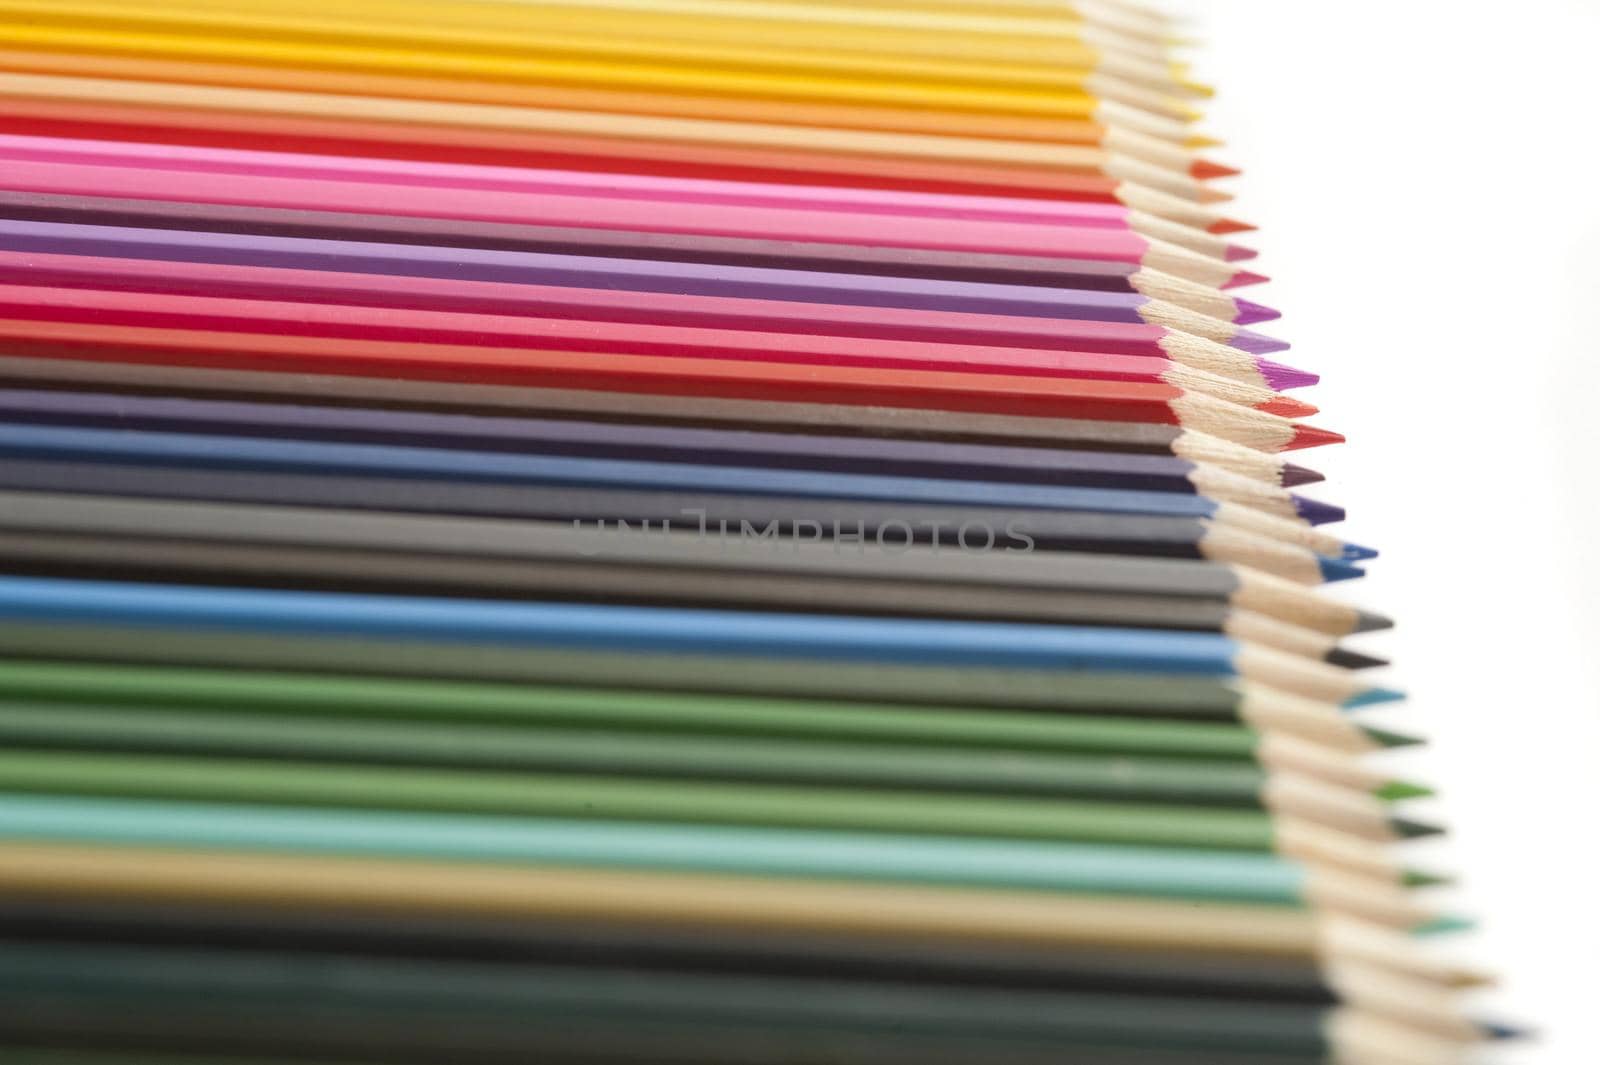 Large set of colored pencil crayons arranged in a neat receding line viewed low angle with selective focus to the red shades